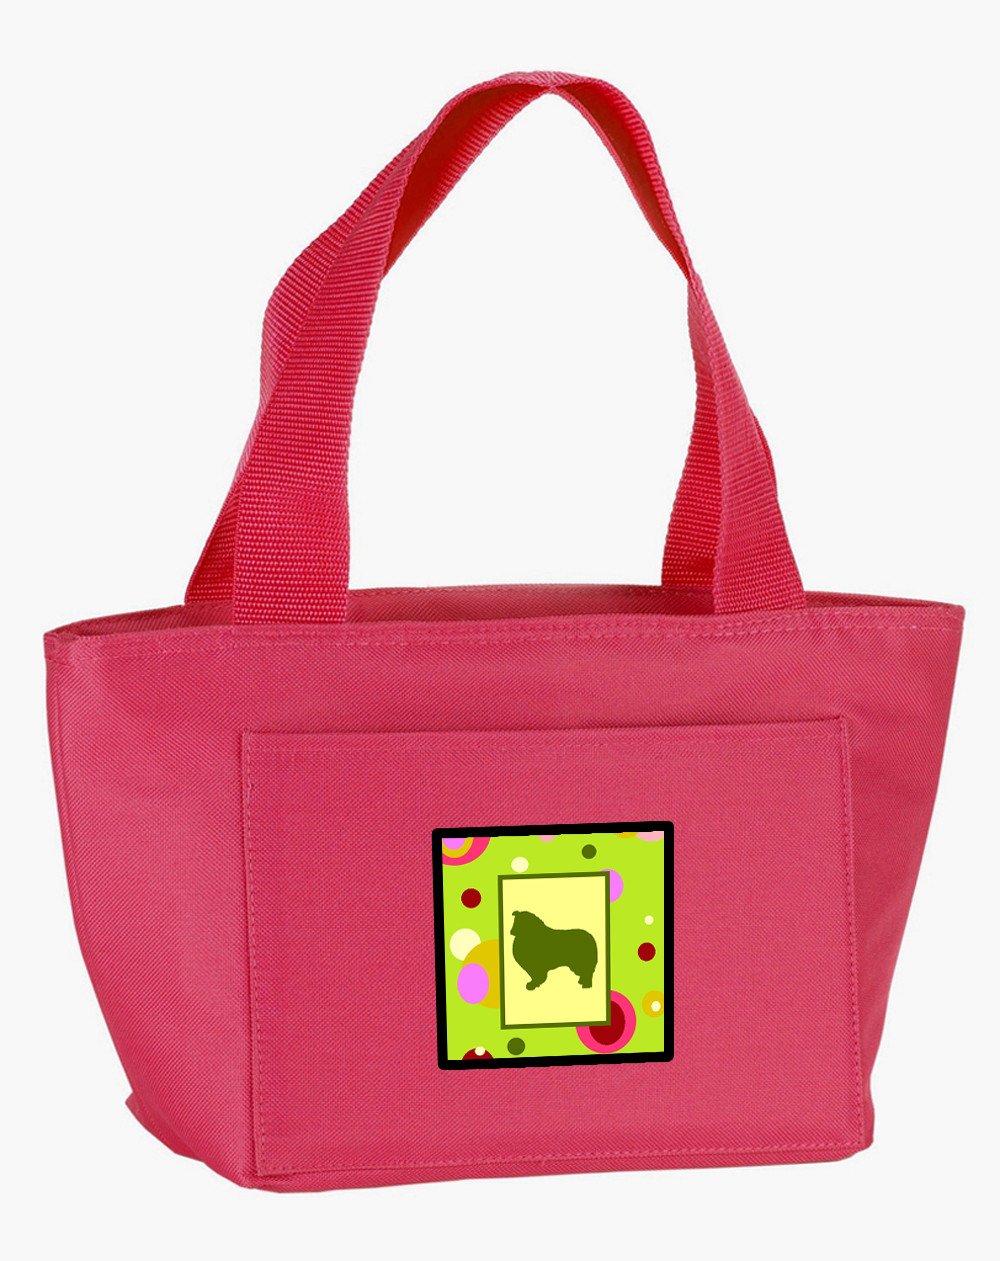 Lime Green Dots Collie Lunch Bag CK1126PK-8808 by Caroline's Treasures